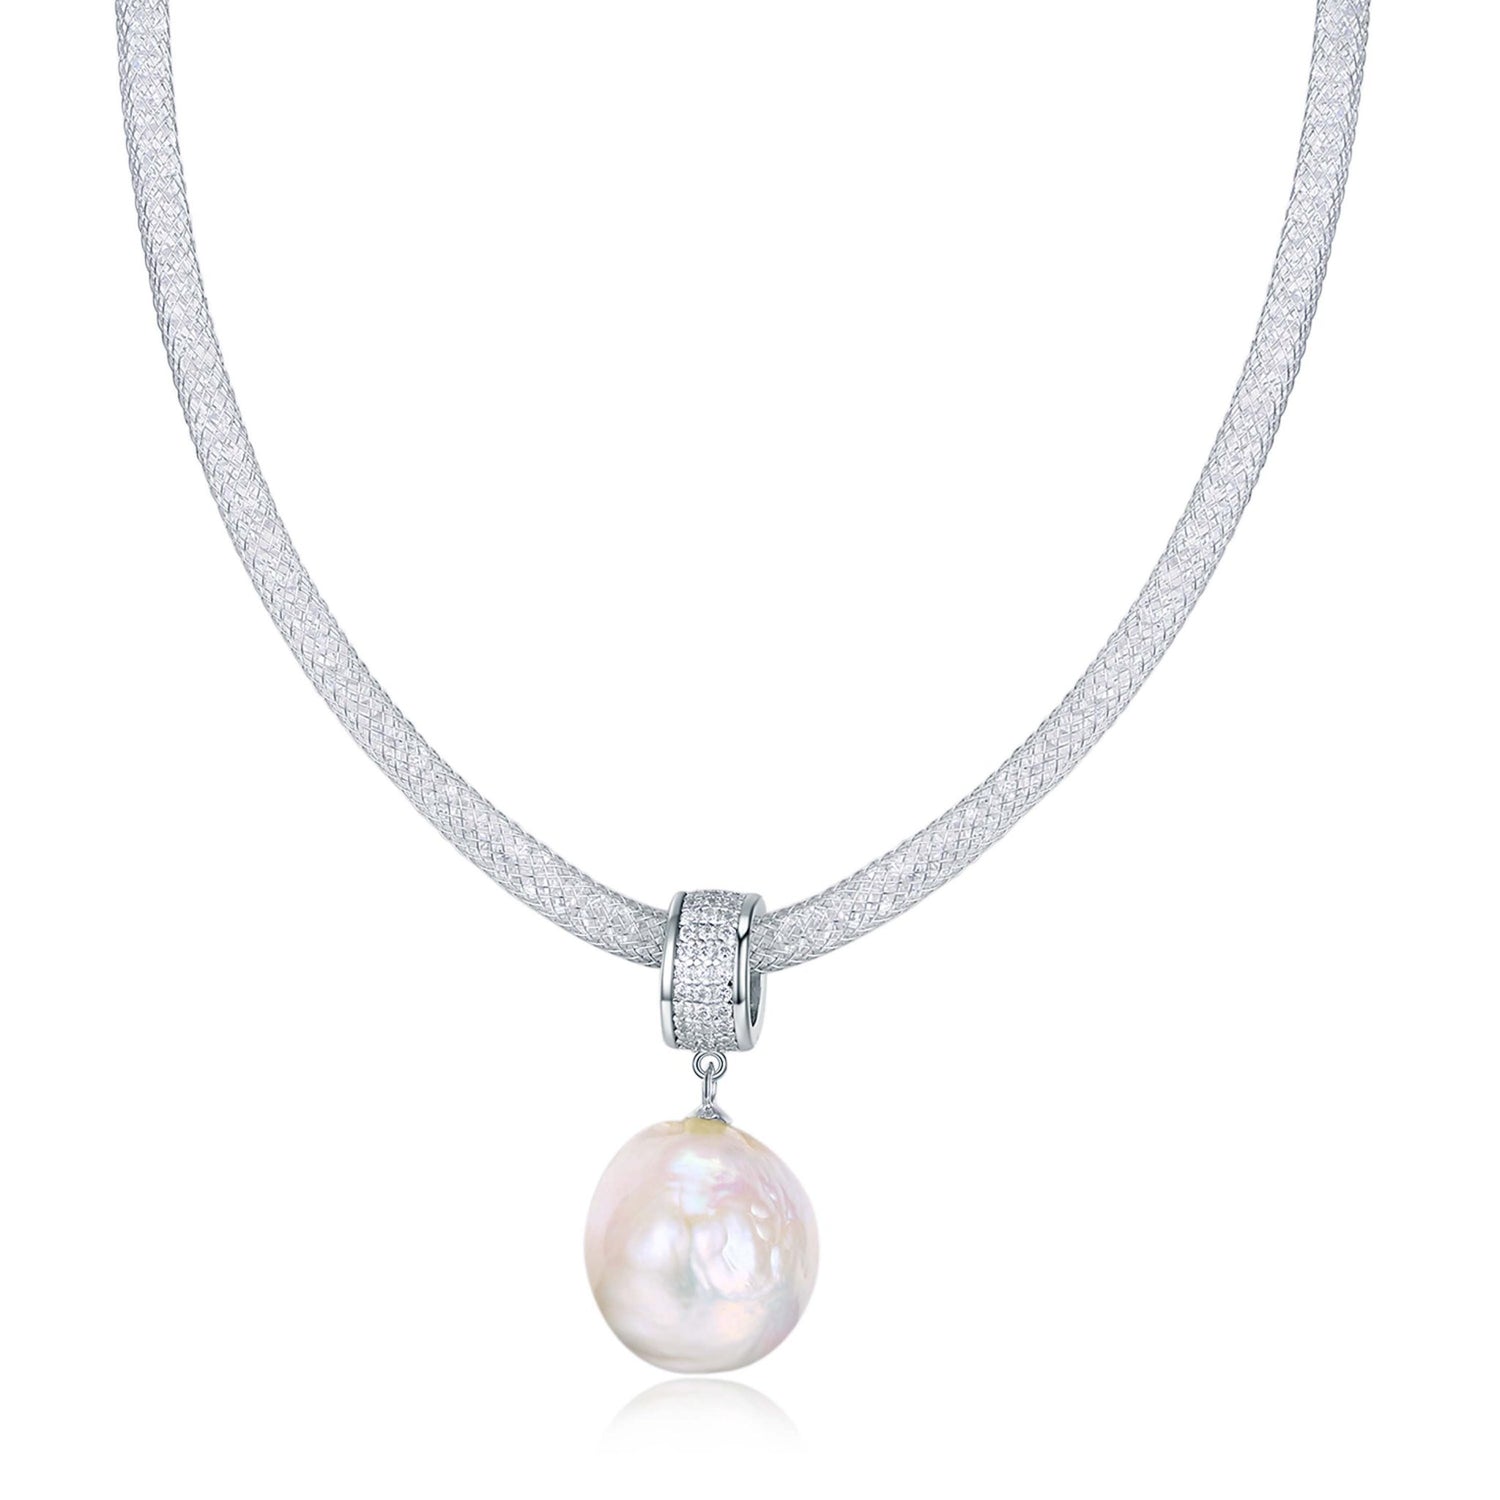 GIANT BAROQUE PEARL FORTUNE ROLL NECKLACE - Timeless Pearl